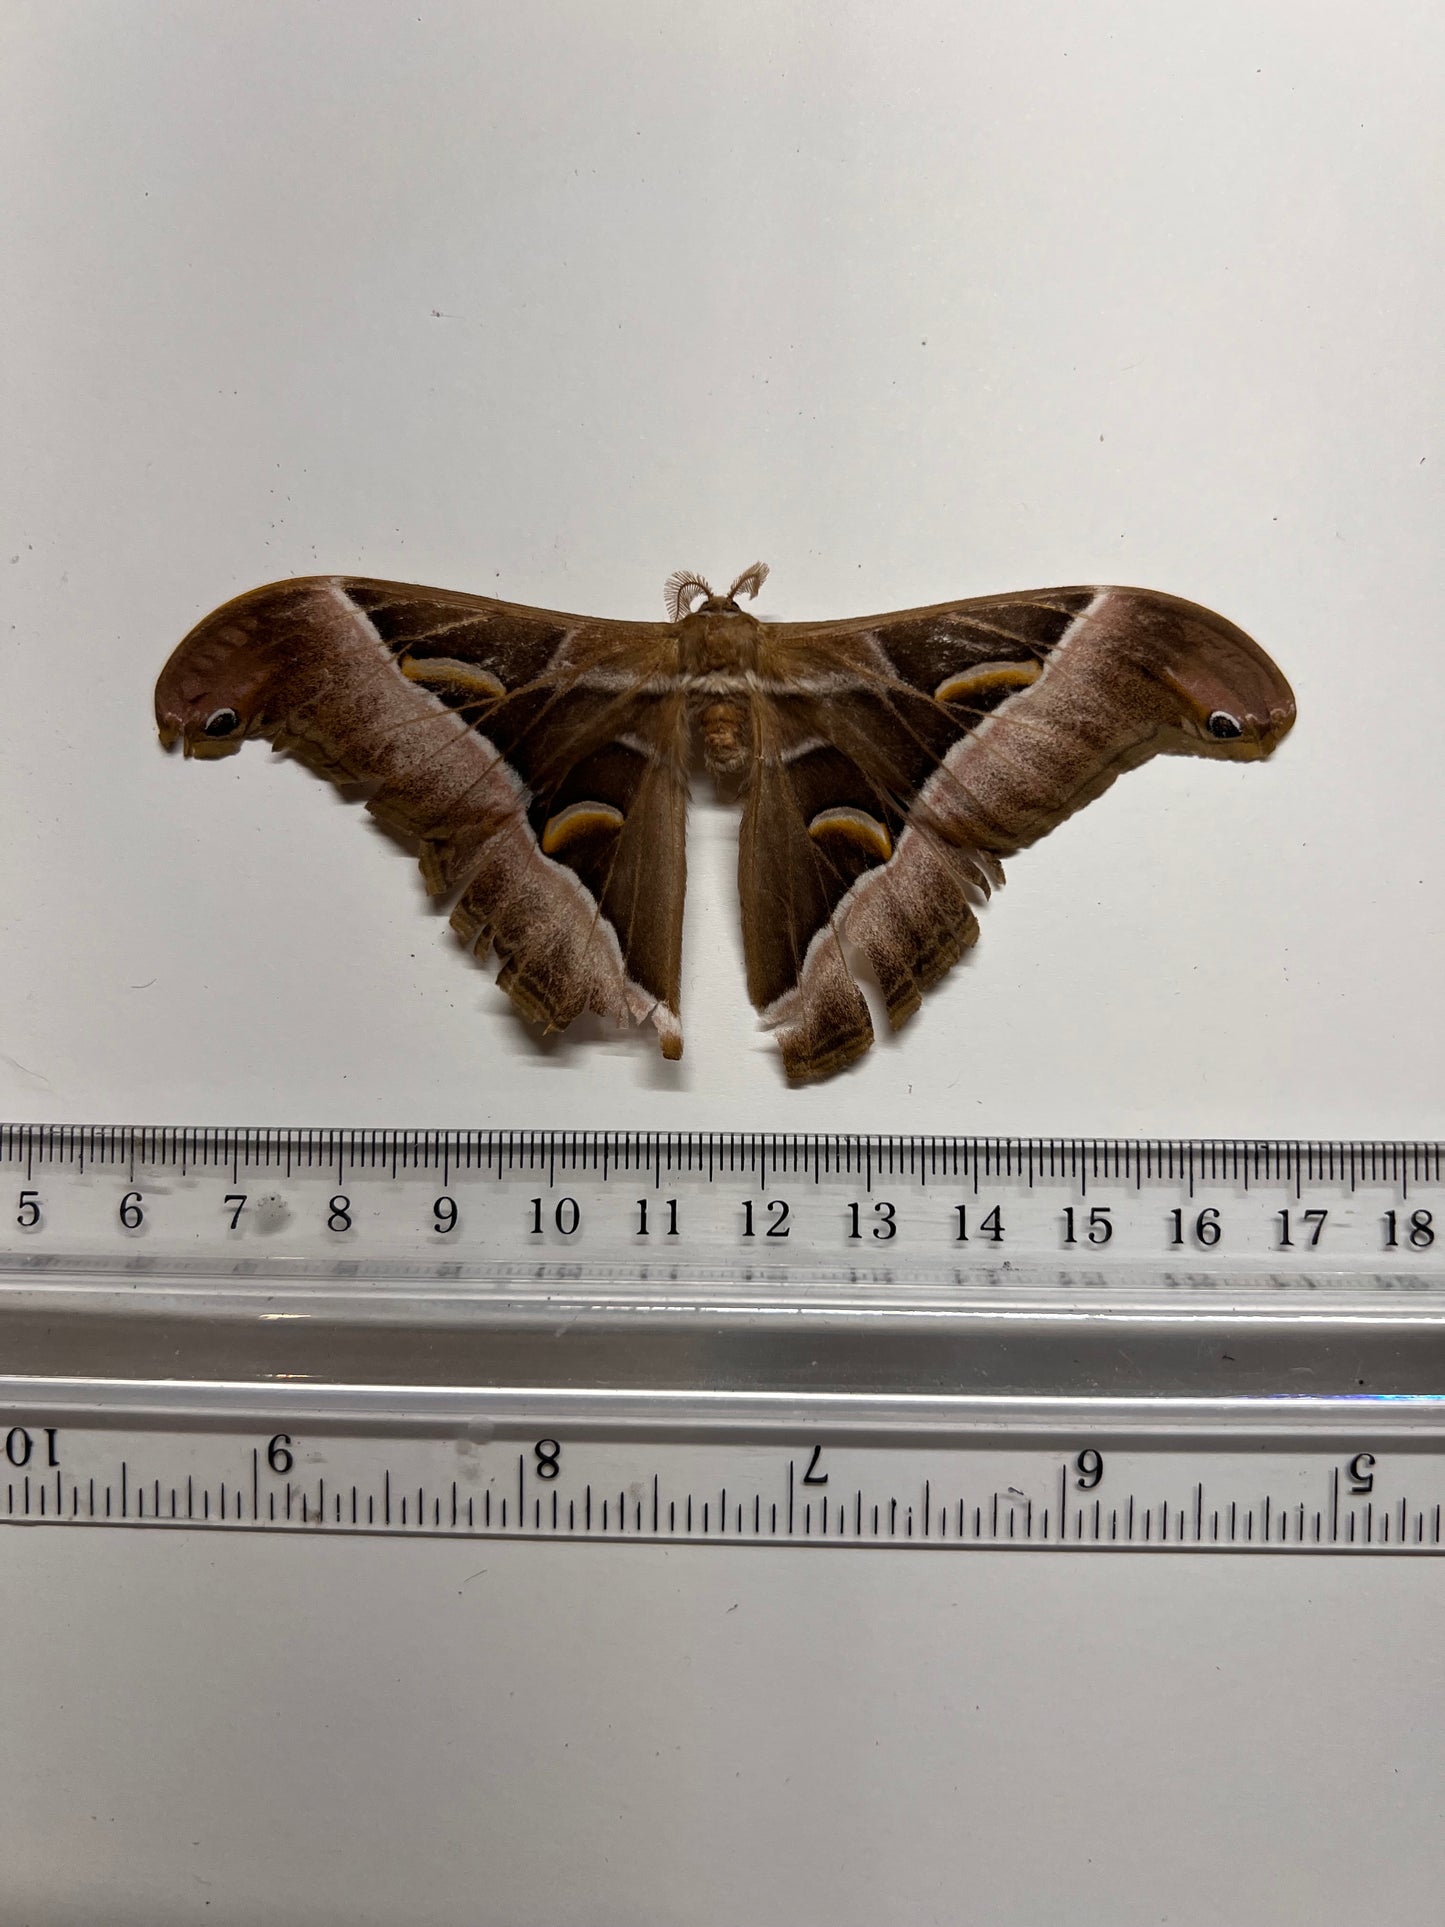 Cynthia Moth - Natural Death Papered Specimen